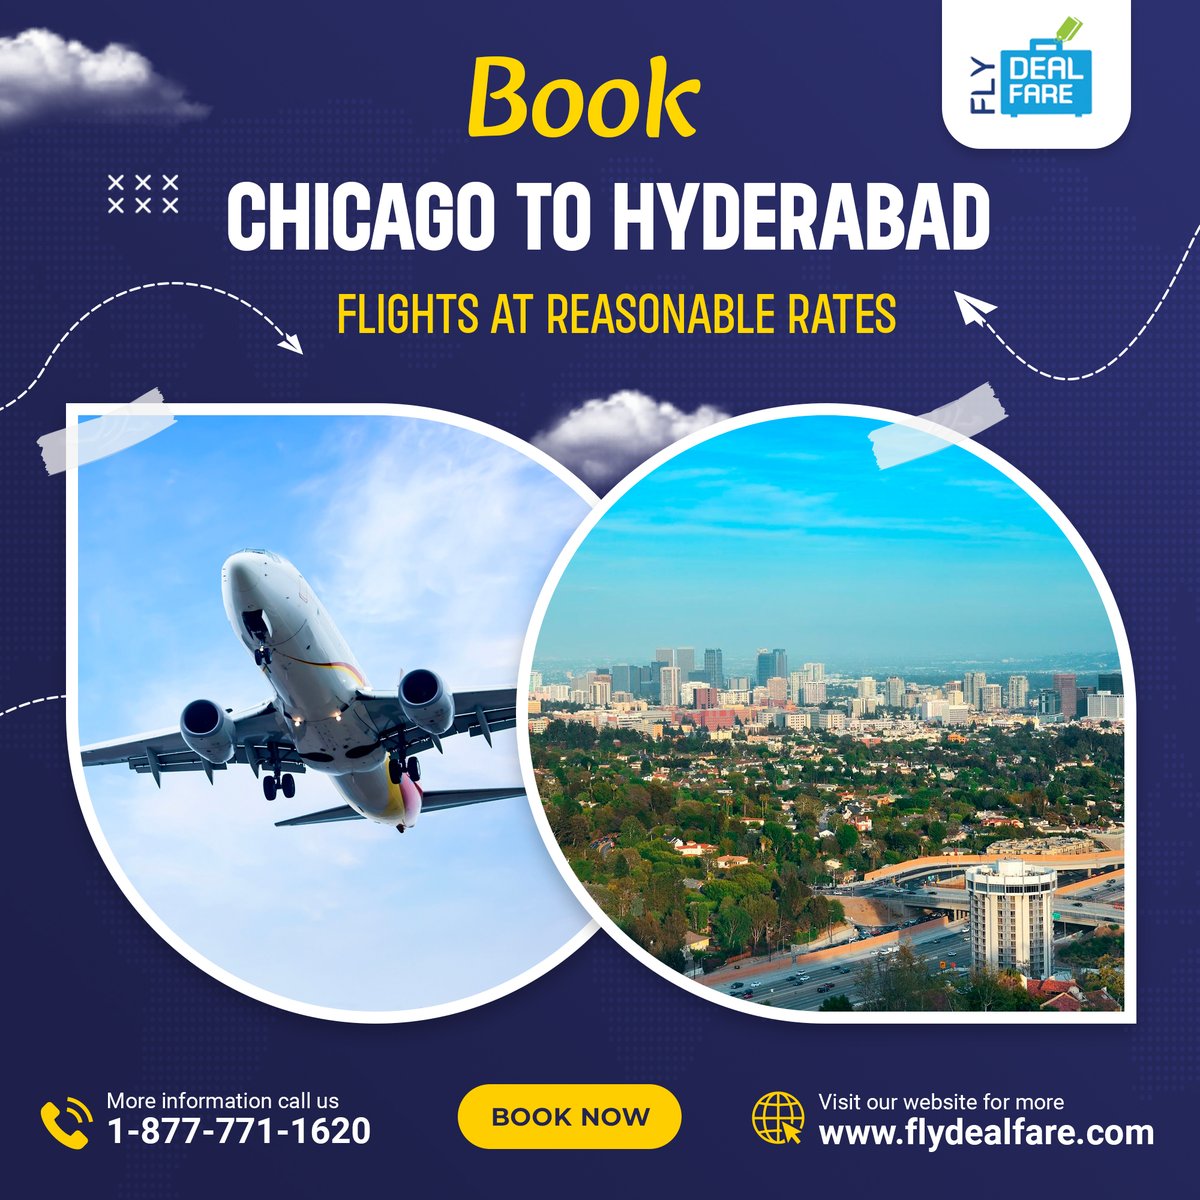 Find unbeatable deals on Chicago to Hyderabad flights. Book now at FlyDealFare and embark on a memorable journey to Hyderabad, India.

Source: flydealfare.com/flights-to-ind…
.
.
.
.
#FlyDealFare #ChicagoToHyderabad #FlyToHyderabad #UnbeatableDeals #FlightOffers #AffordableFlights #fly